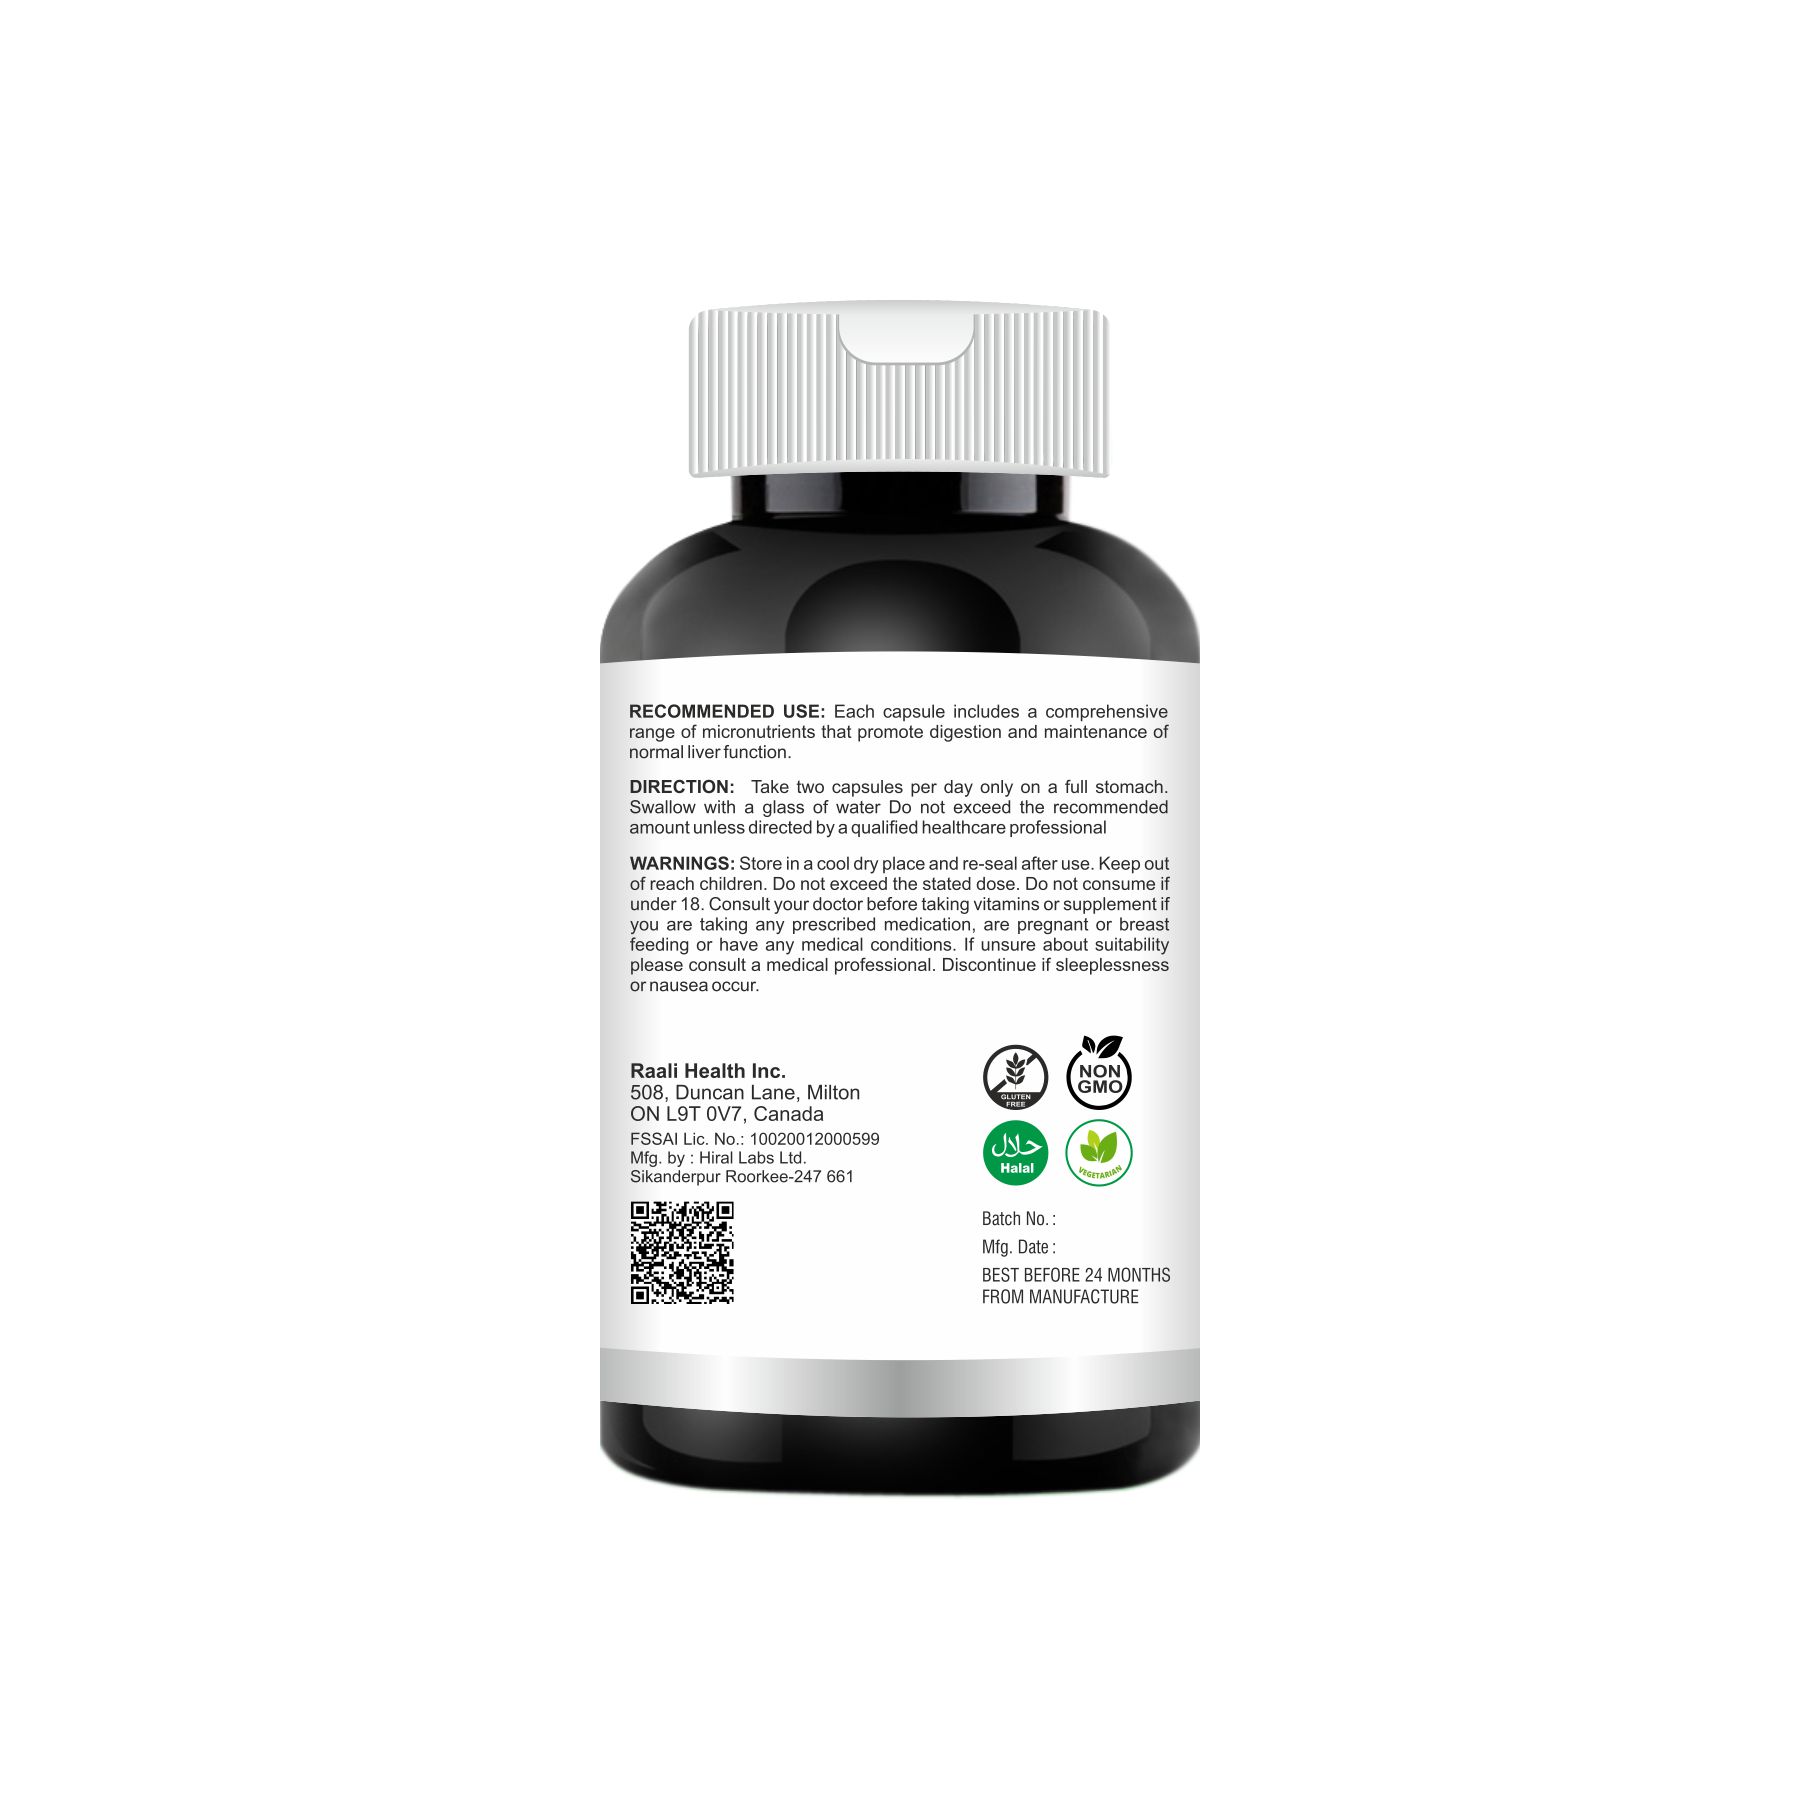 Raali health, liver booster, canada best product